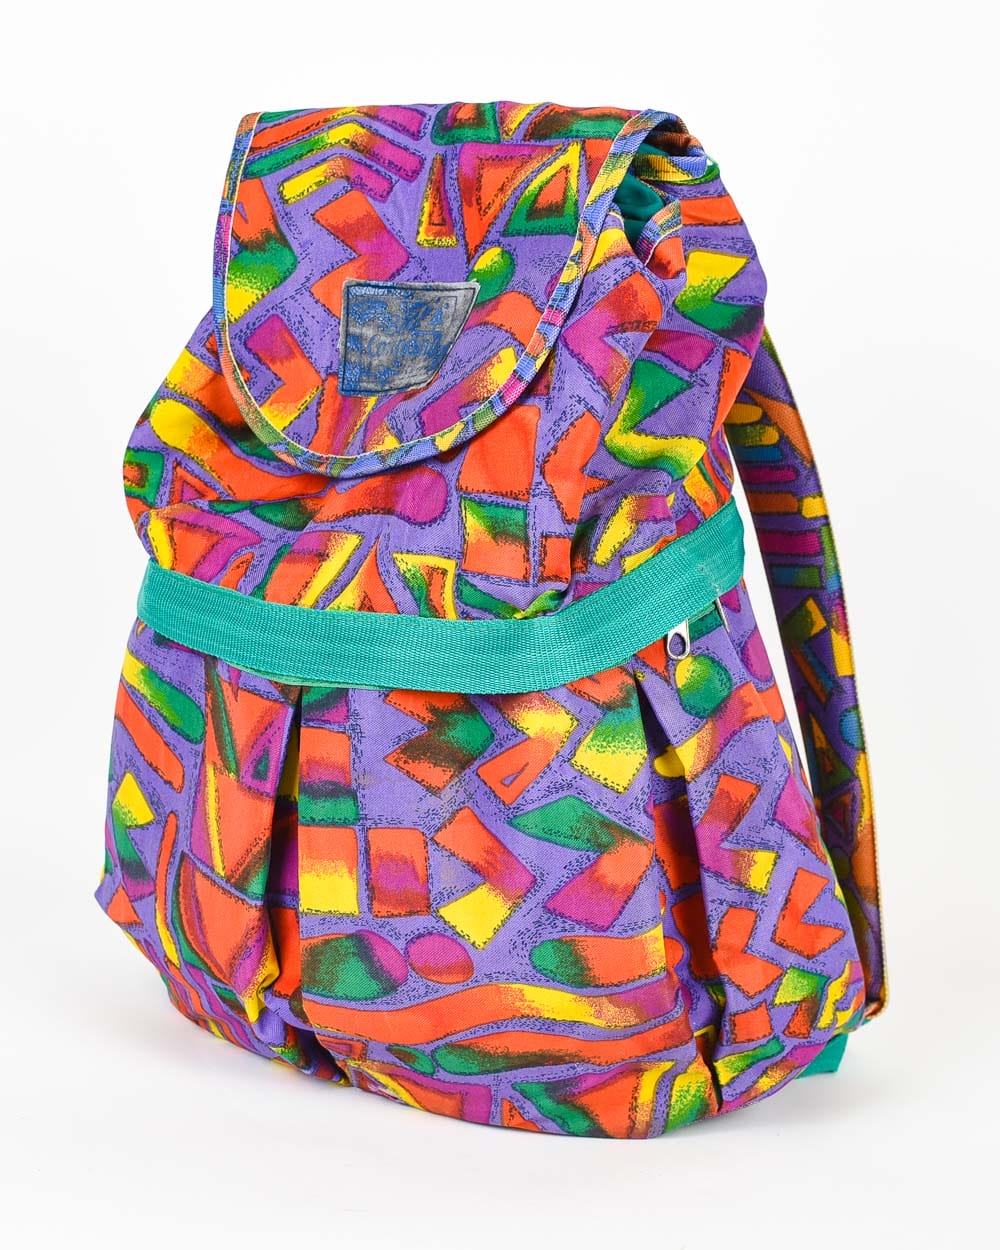  Best Company All-Over Print Backpack